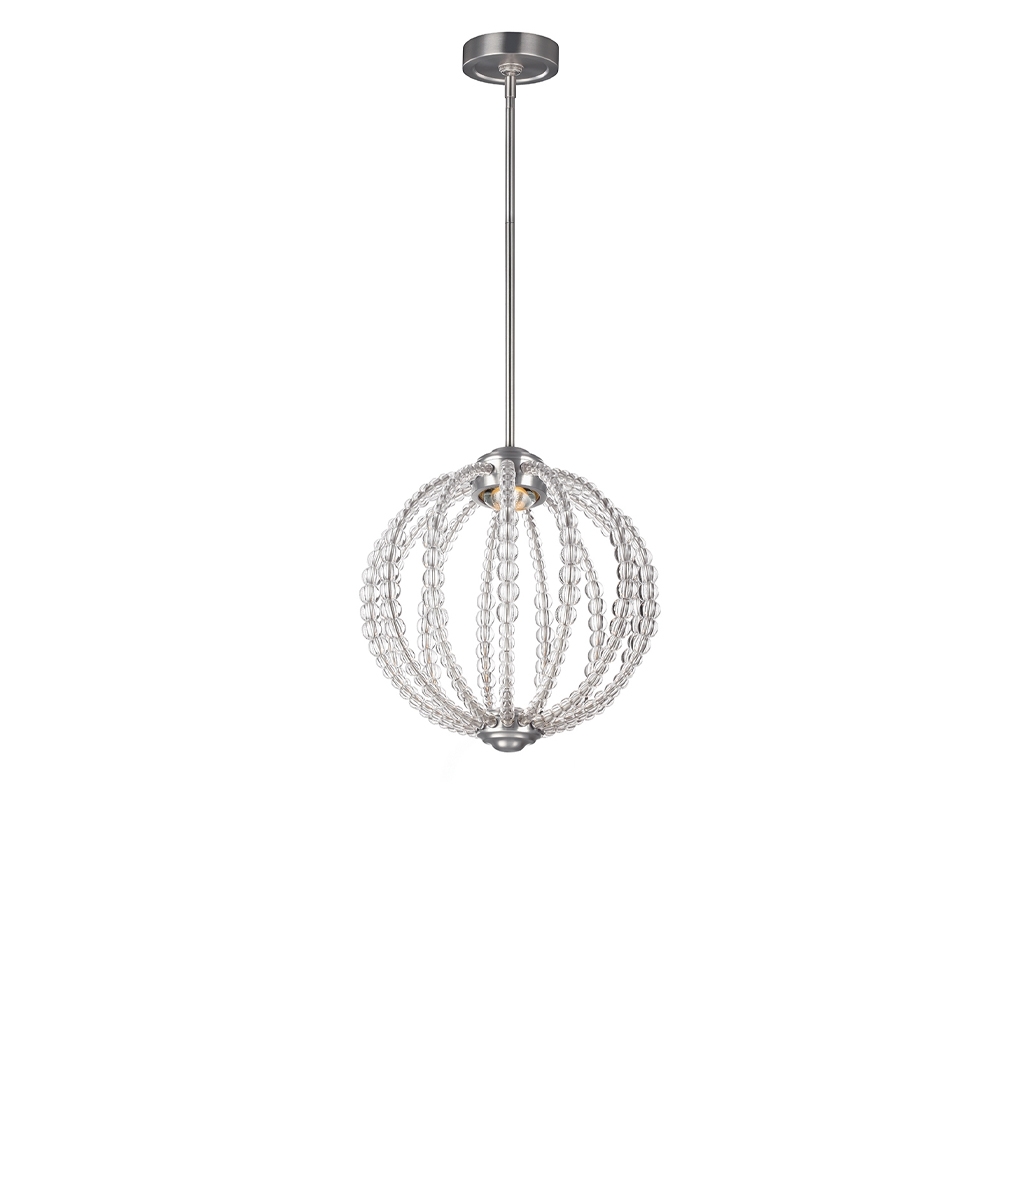 Great looking modern pendant lights using crystal and LED lamps